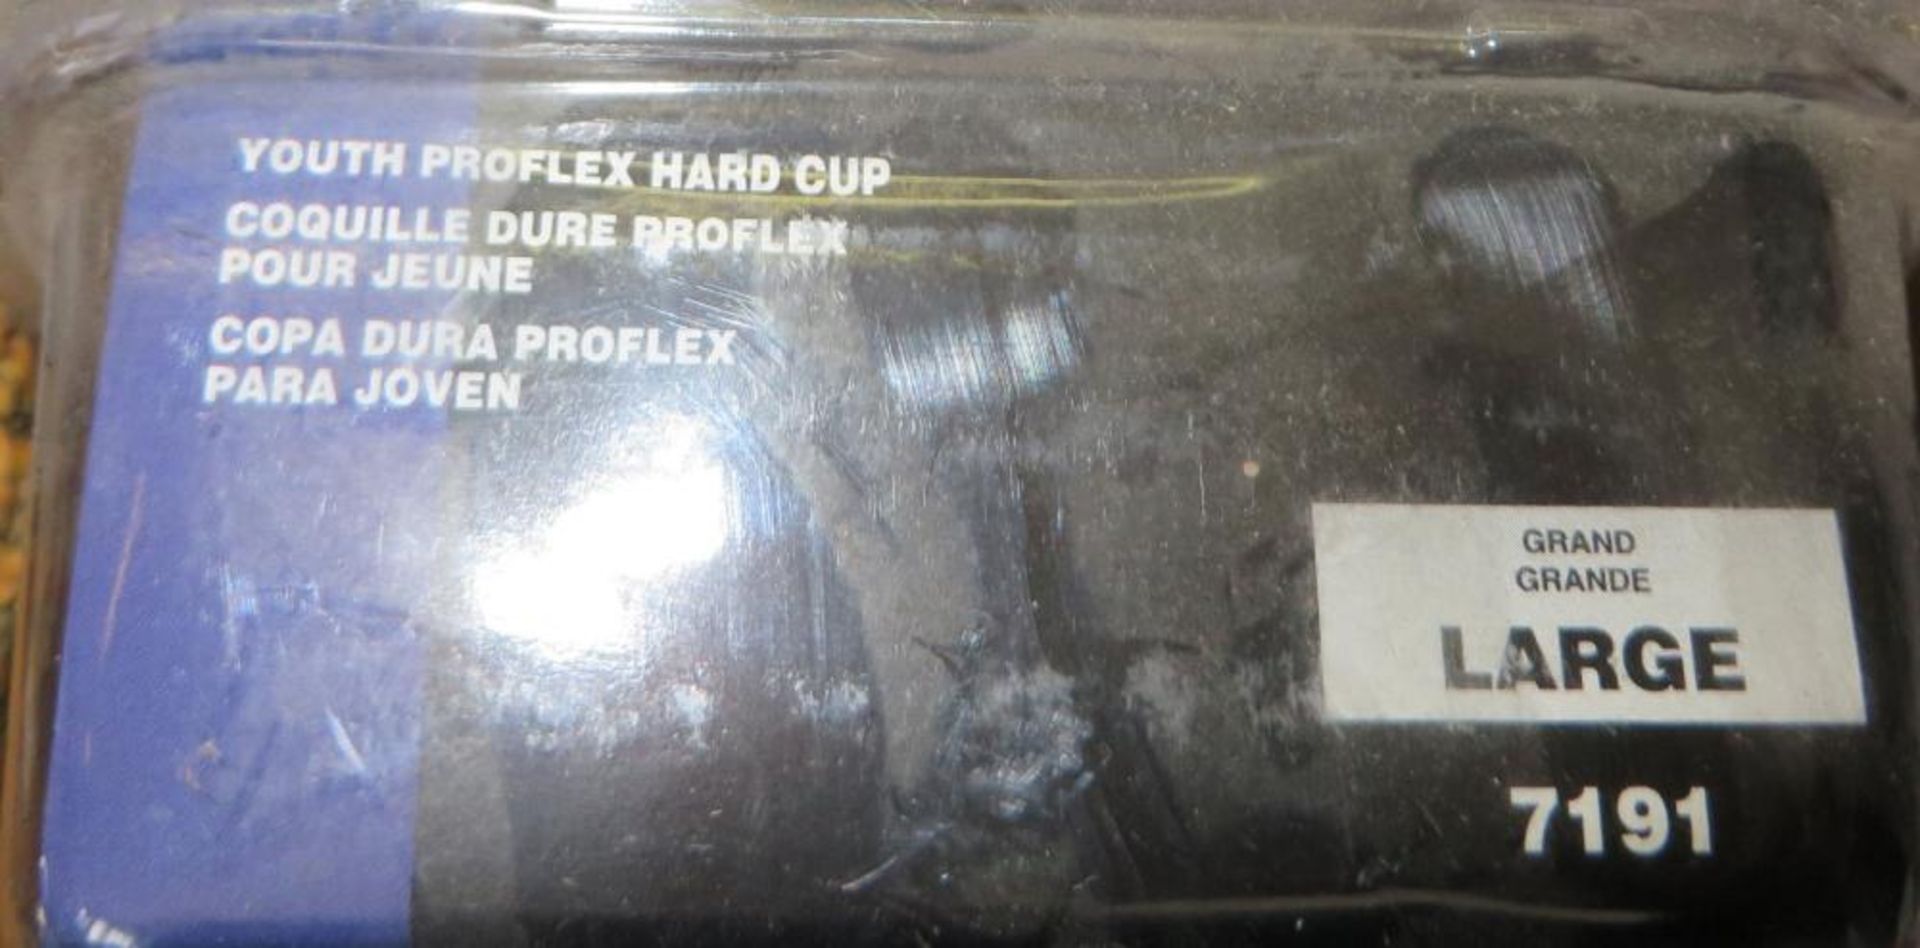 28 x Bike Youth Proflex 2 Protective Cups Large Size - CL185 - Ref: DRT0668 - Location: Stoke ST3 - Image 5 of 5